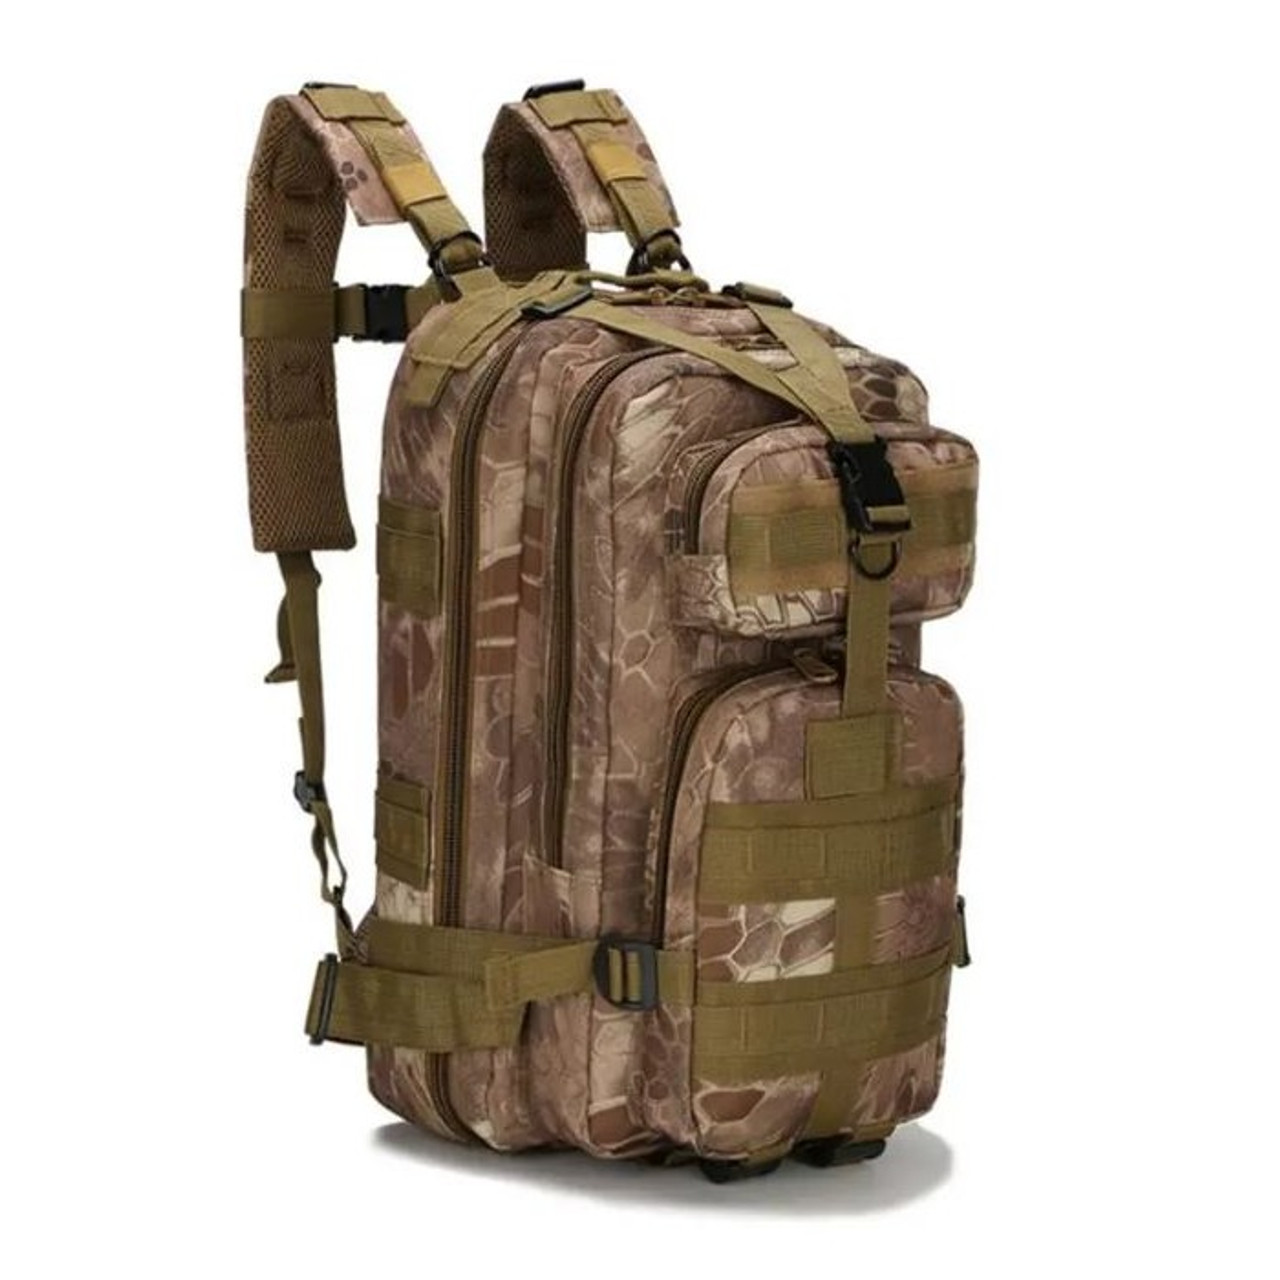 Tactical Backpack for Soldiers and Hikers 25 Liter - Israeli First Aid